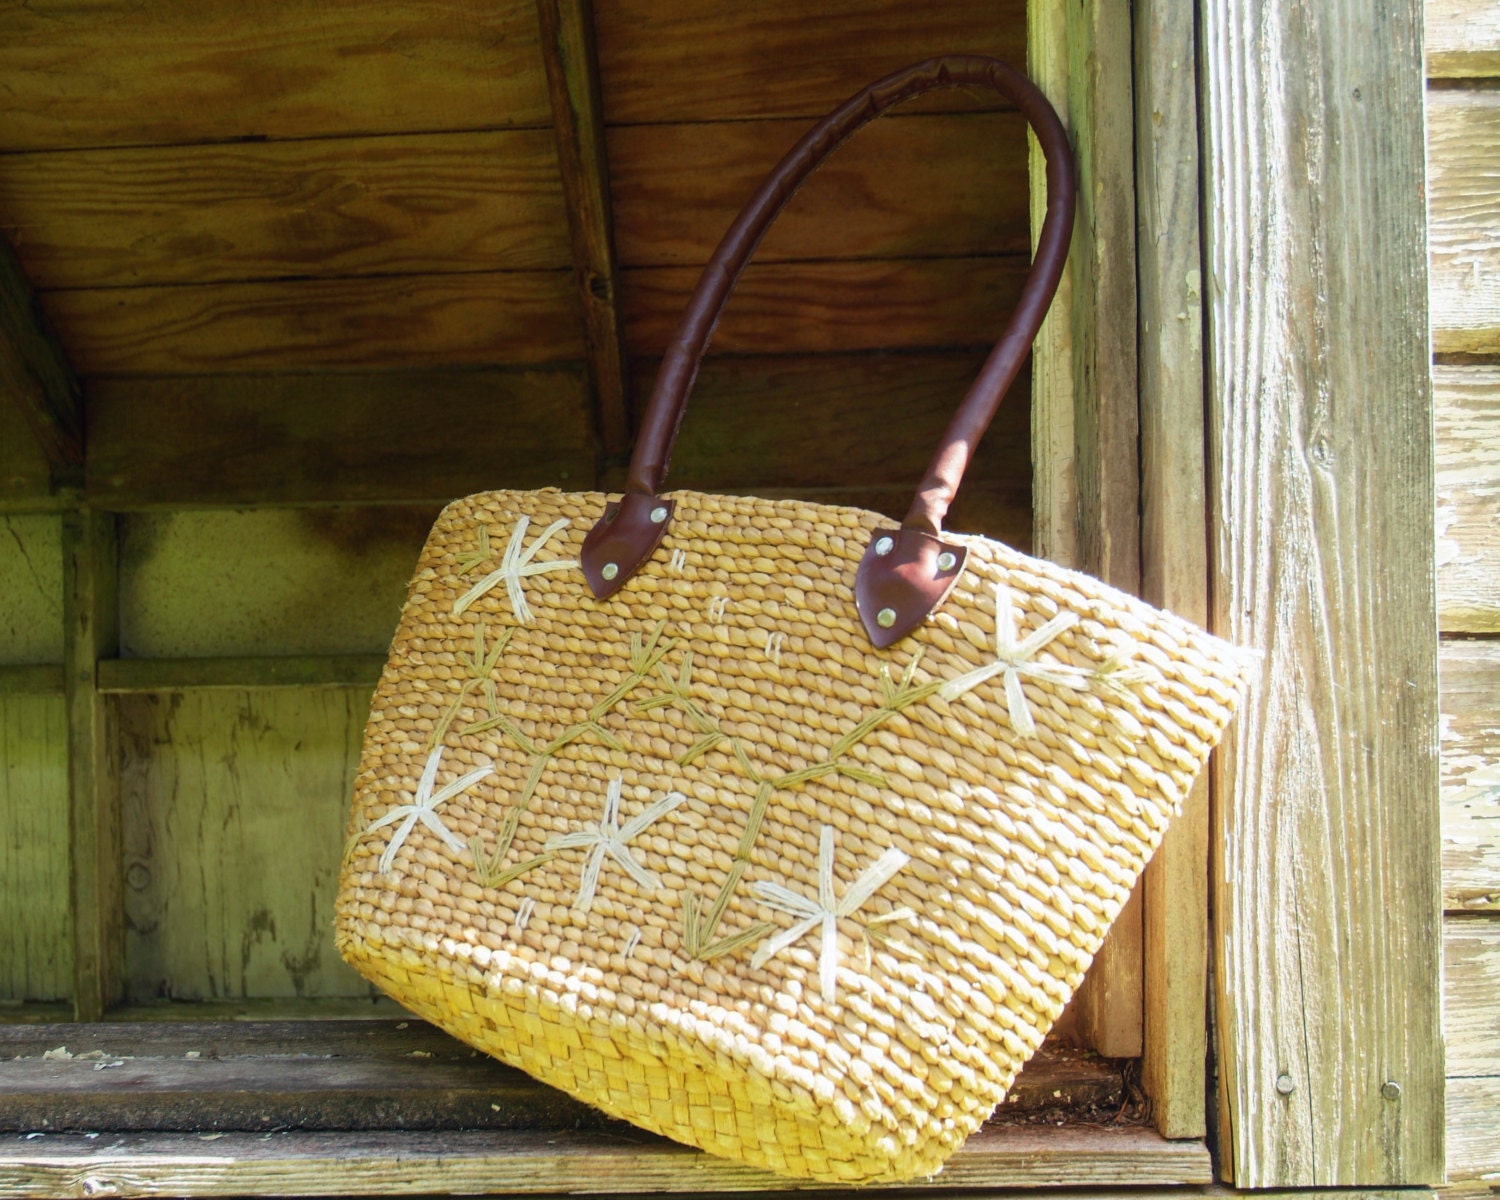 Hand Woven Straw Tote Bag with Leather Handles made from Sea